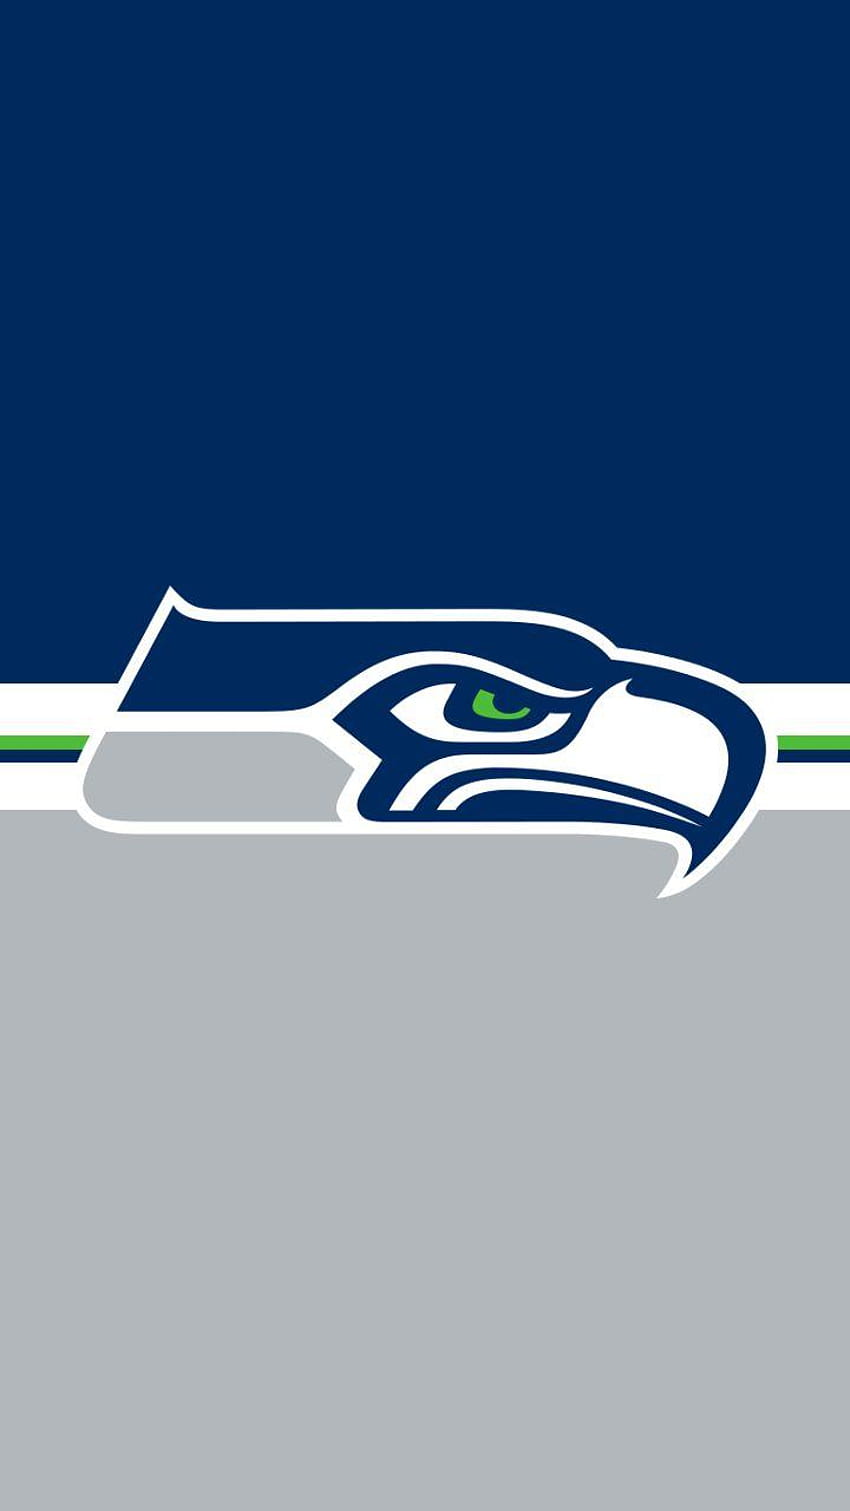 Made a Seattle Seahawks Mobile , Let me know what you think, seattle seahawks 2018 HD phone wallpaper